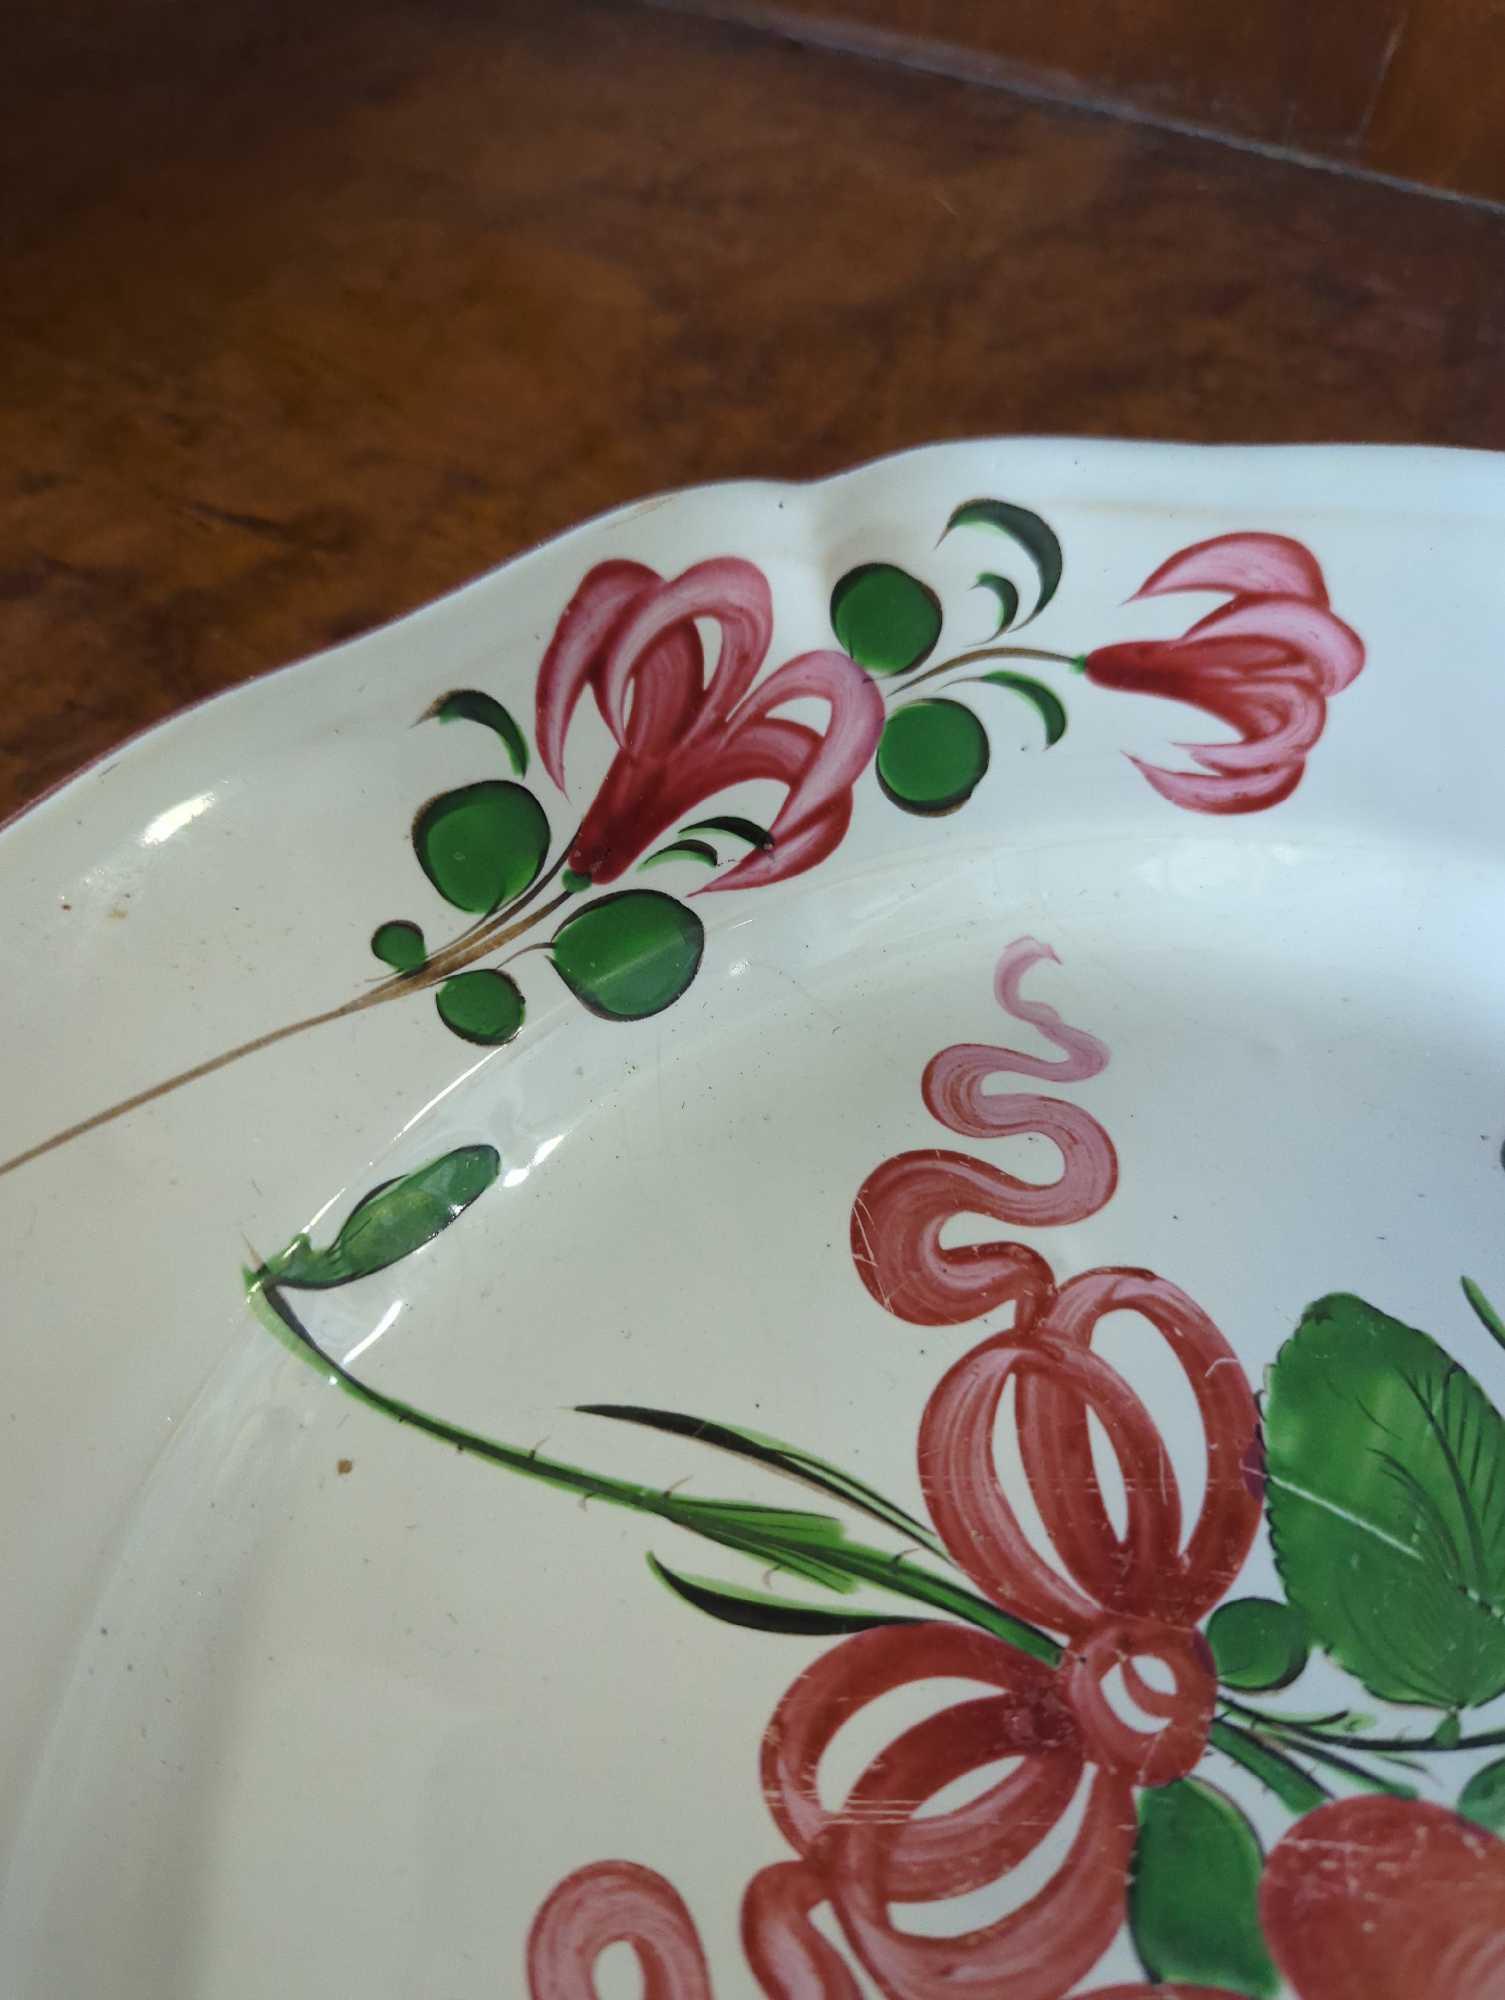 Antique French Faience Plate Hand Painted Floral French, Measure Approximately 12 Inches In Diameter